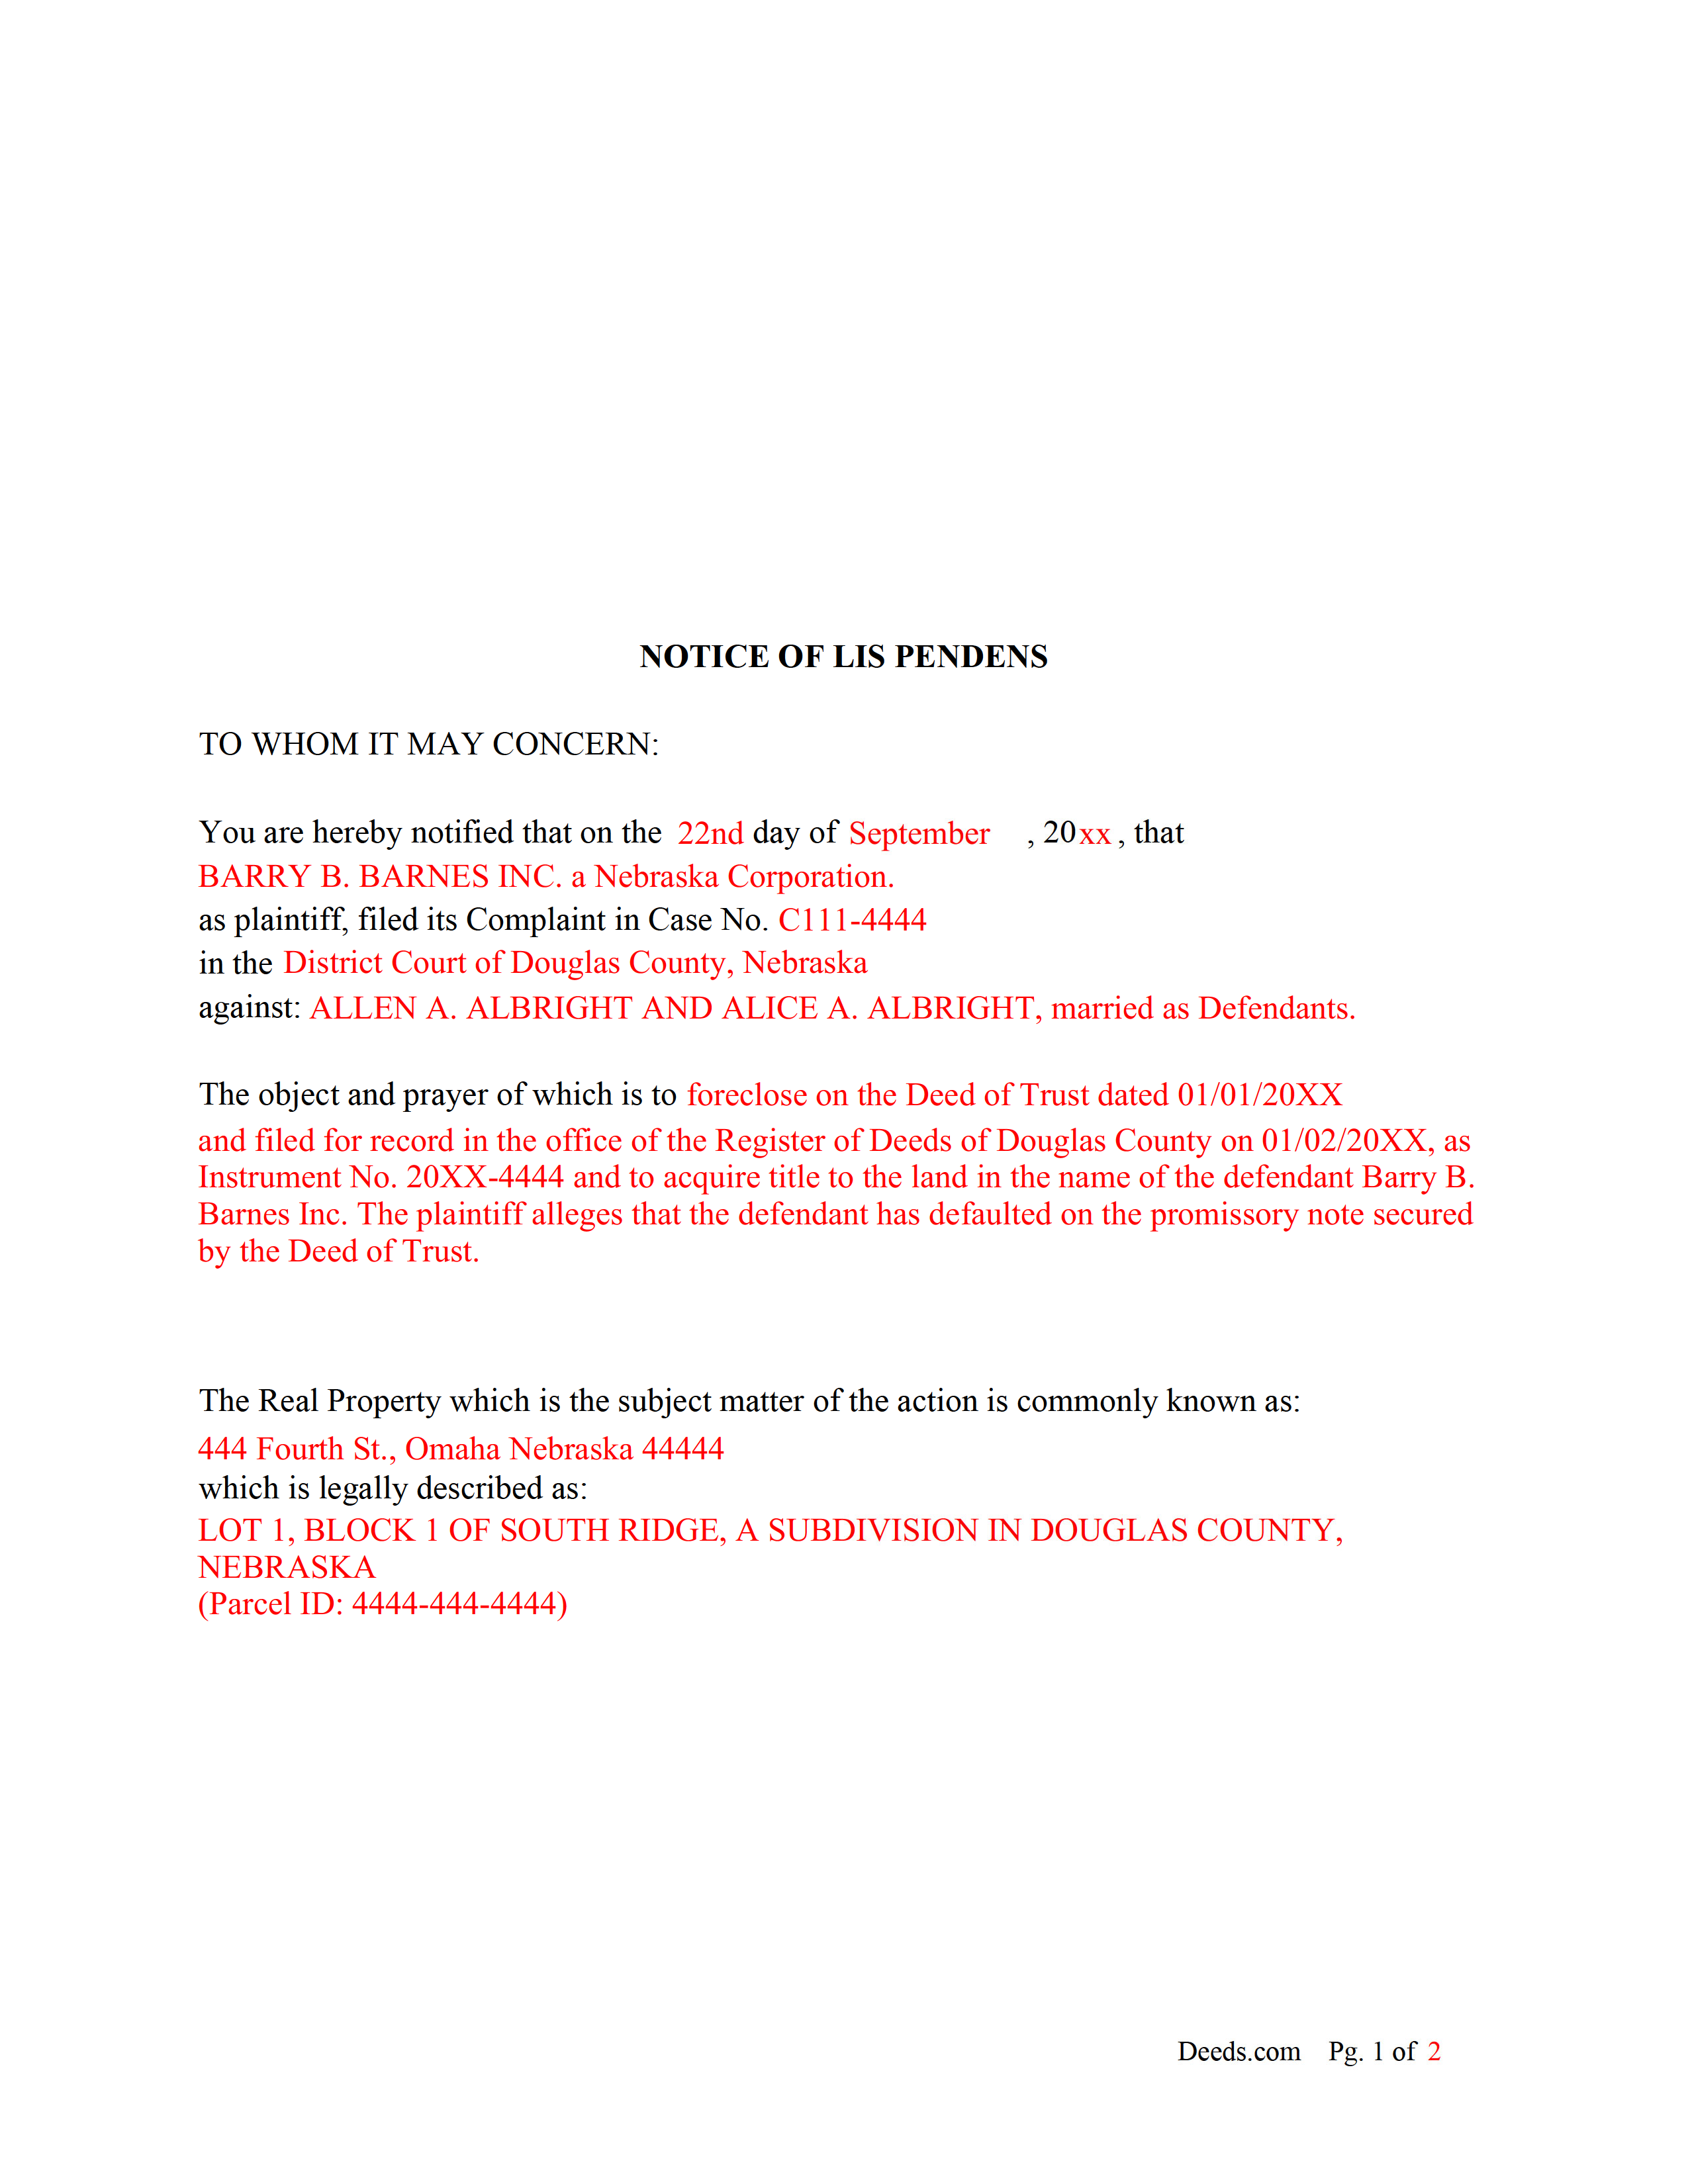 Completed Example of the Notice of Lis Pendens Document